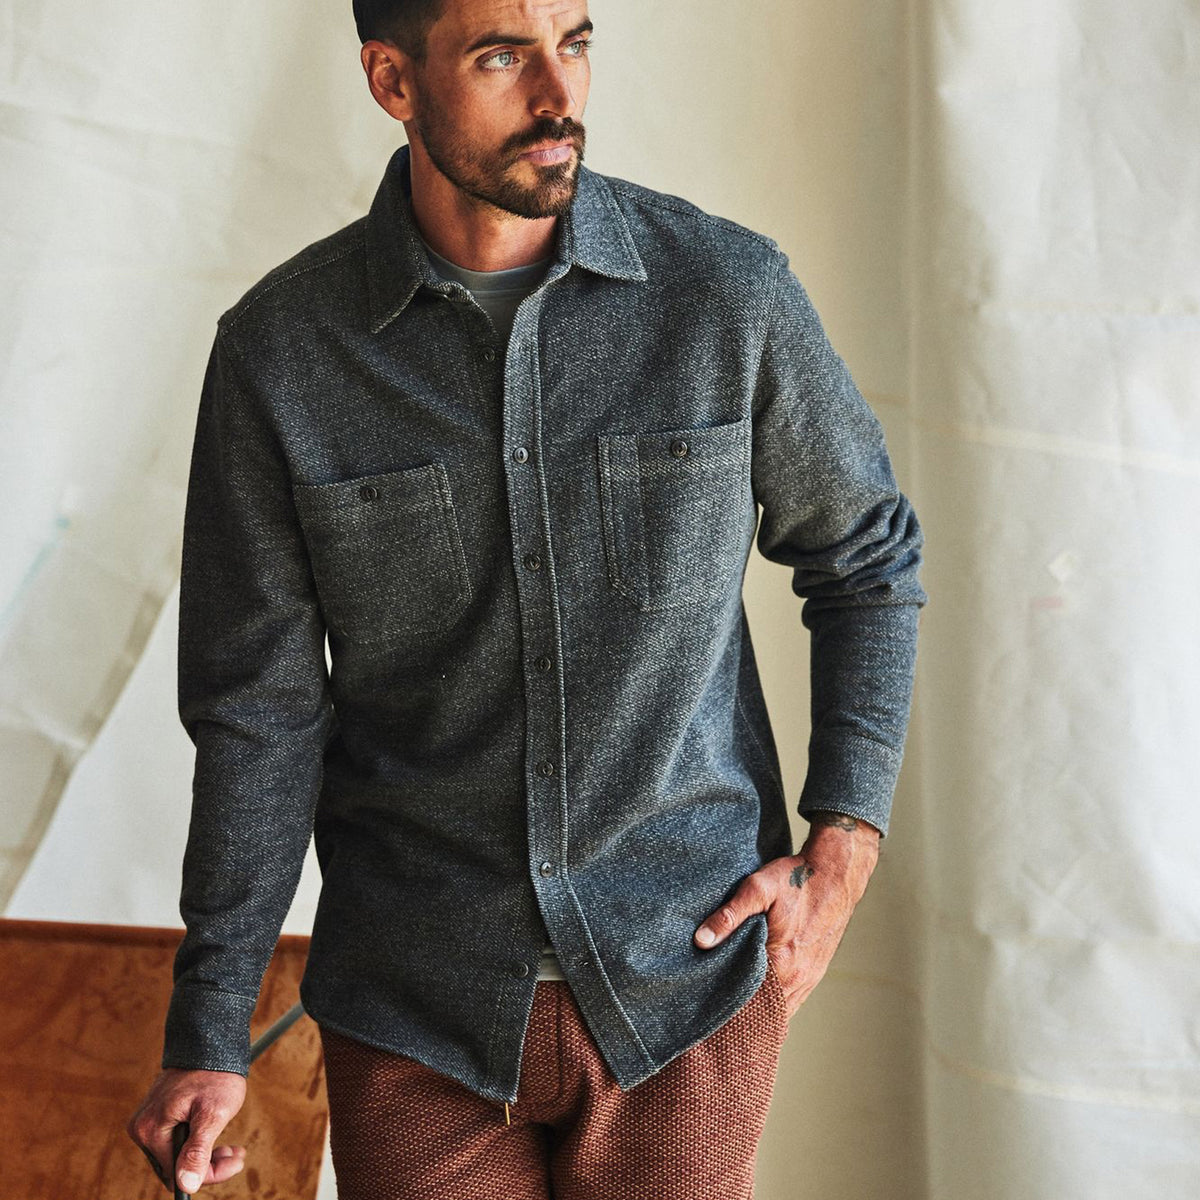 The Utility Shirt in Navy French Terry Twill Knit